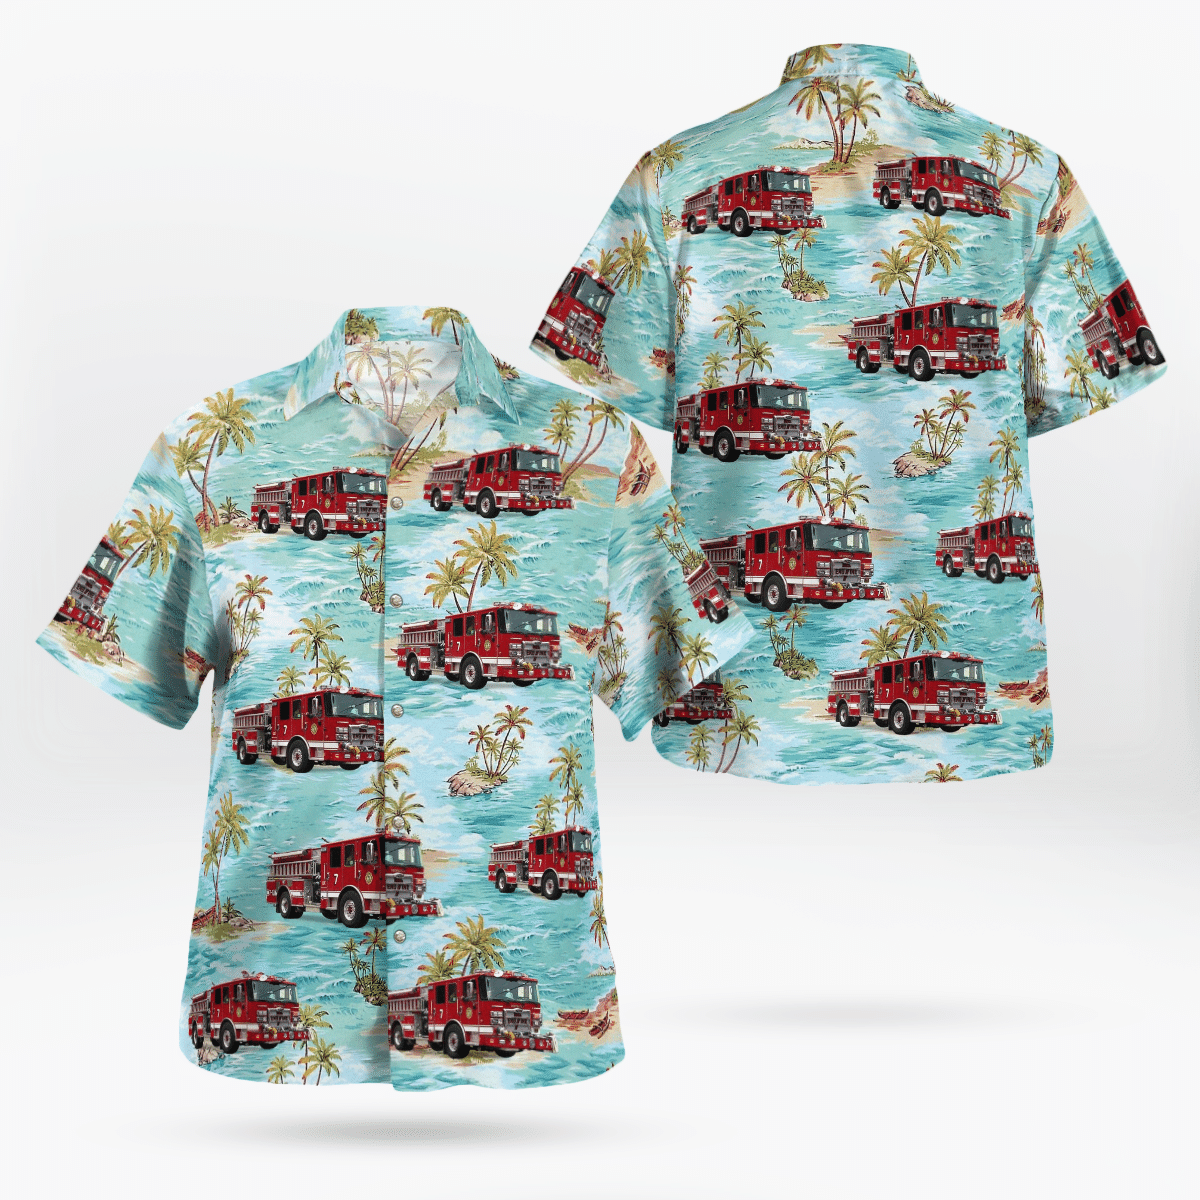 If you are in need of a new summertime look, pick up this Hawaiian shirt 72